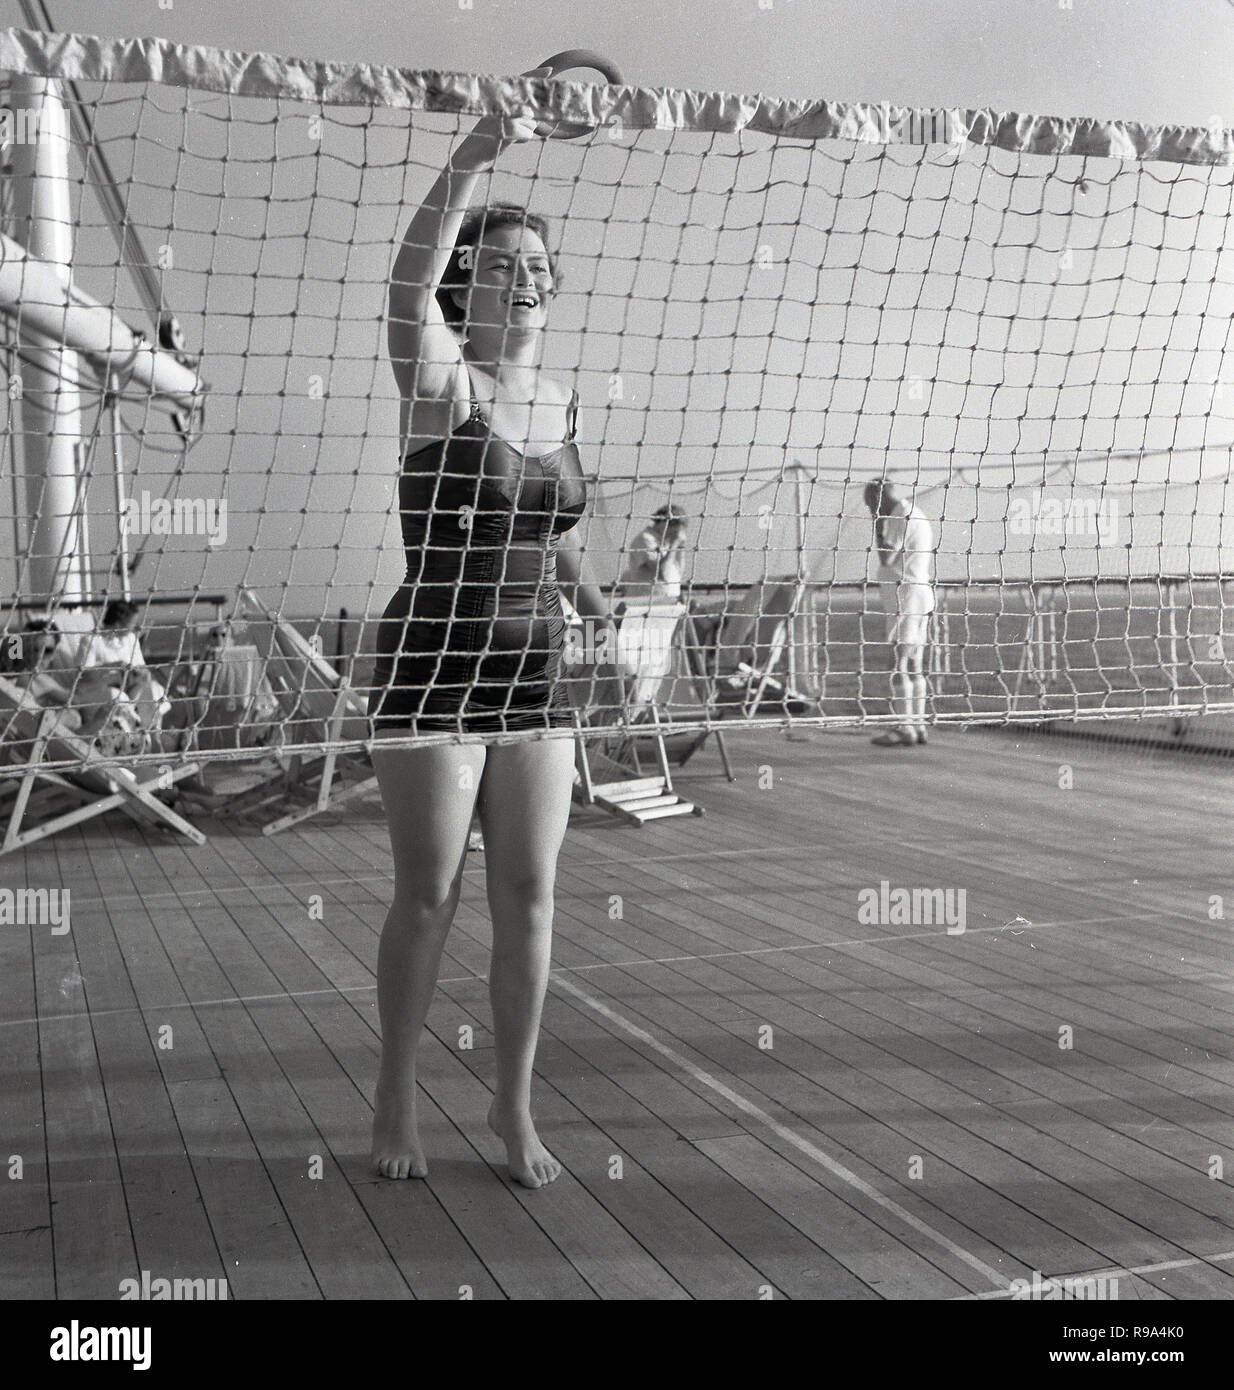 1950s, historical, on board the union-castle steamship 'Kenya', a lady passenger in her swimsuit outside on the ship's wooden deck playing a throwing game over a net. Stock Photo